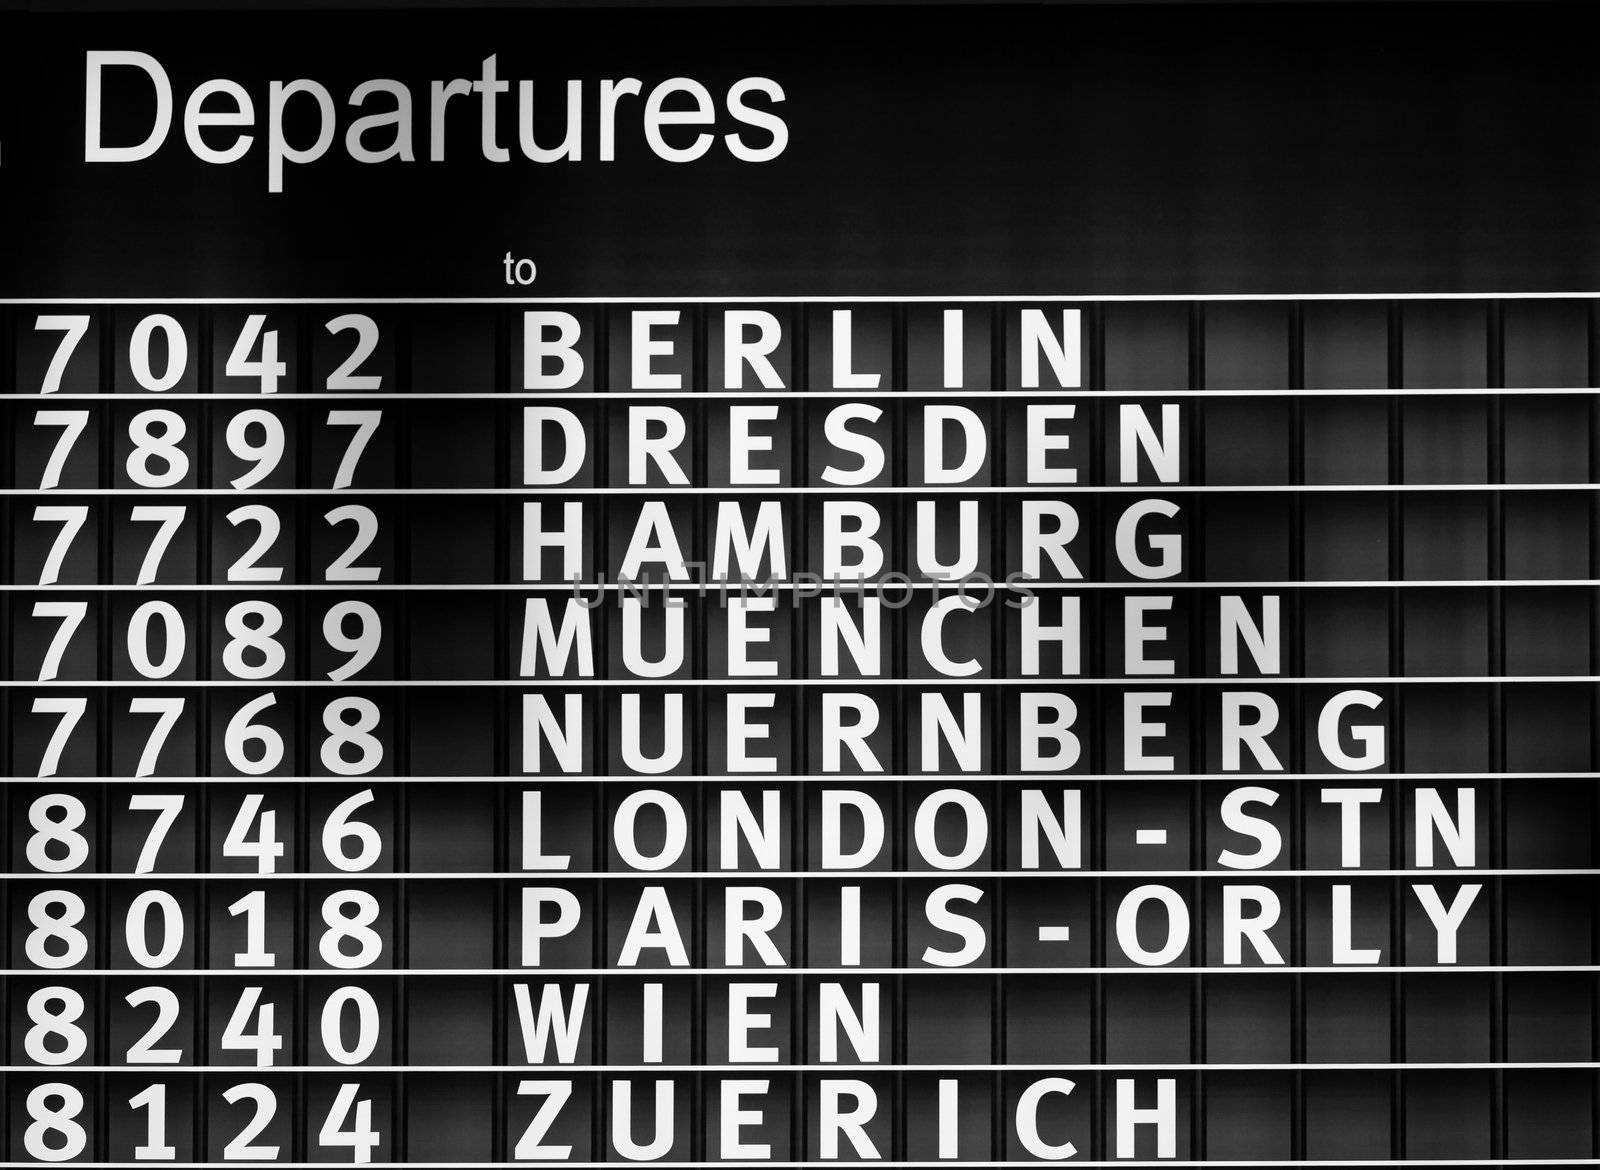 Airport departures information board - air travel background